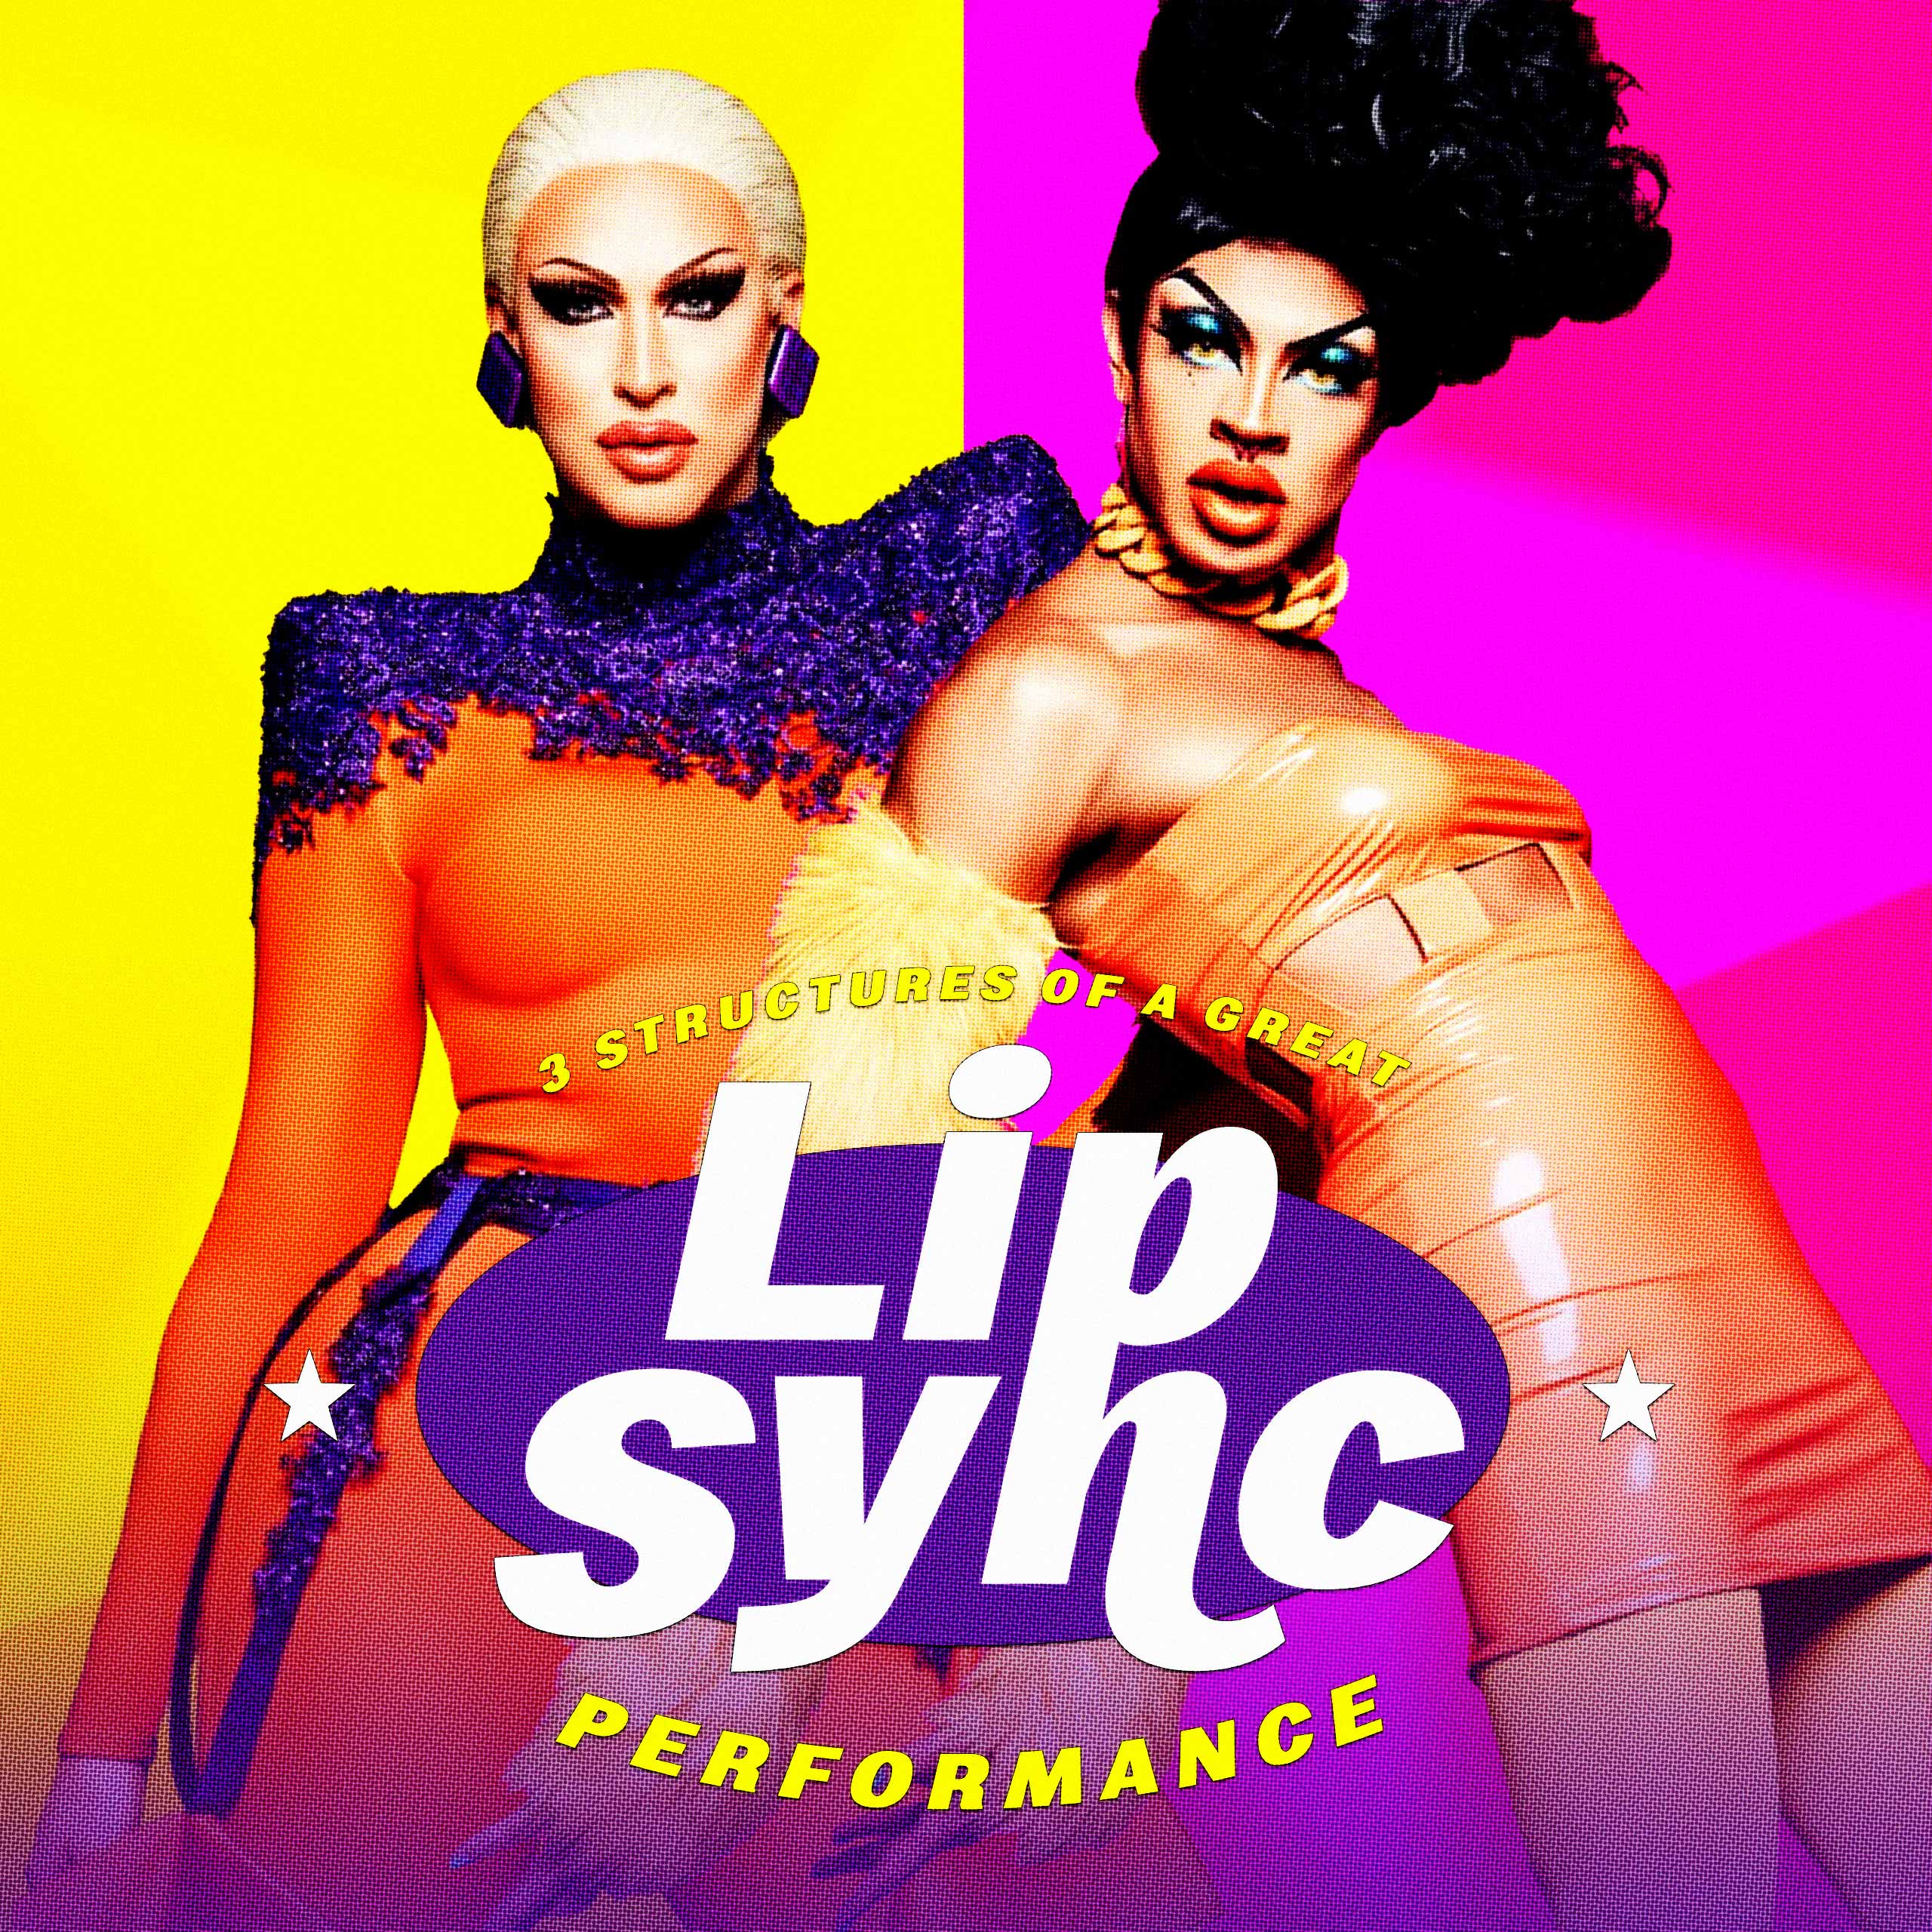 The Structures Of A Great Lip-Sync Performance